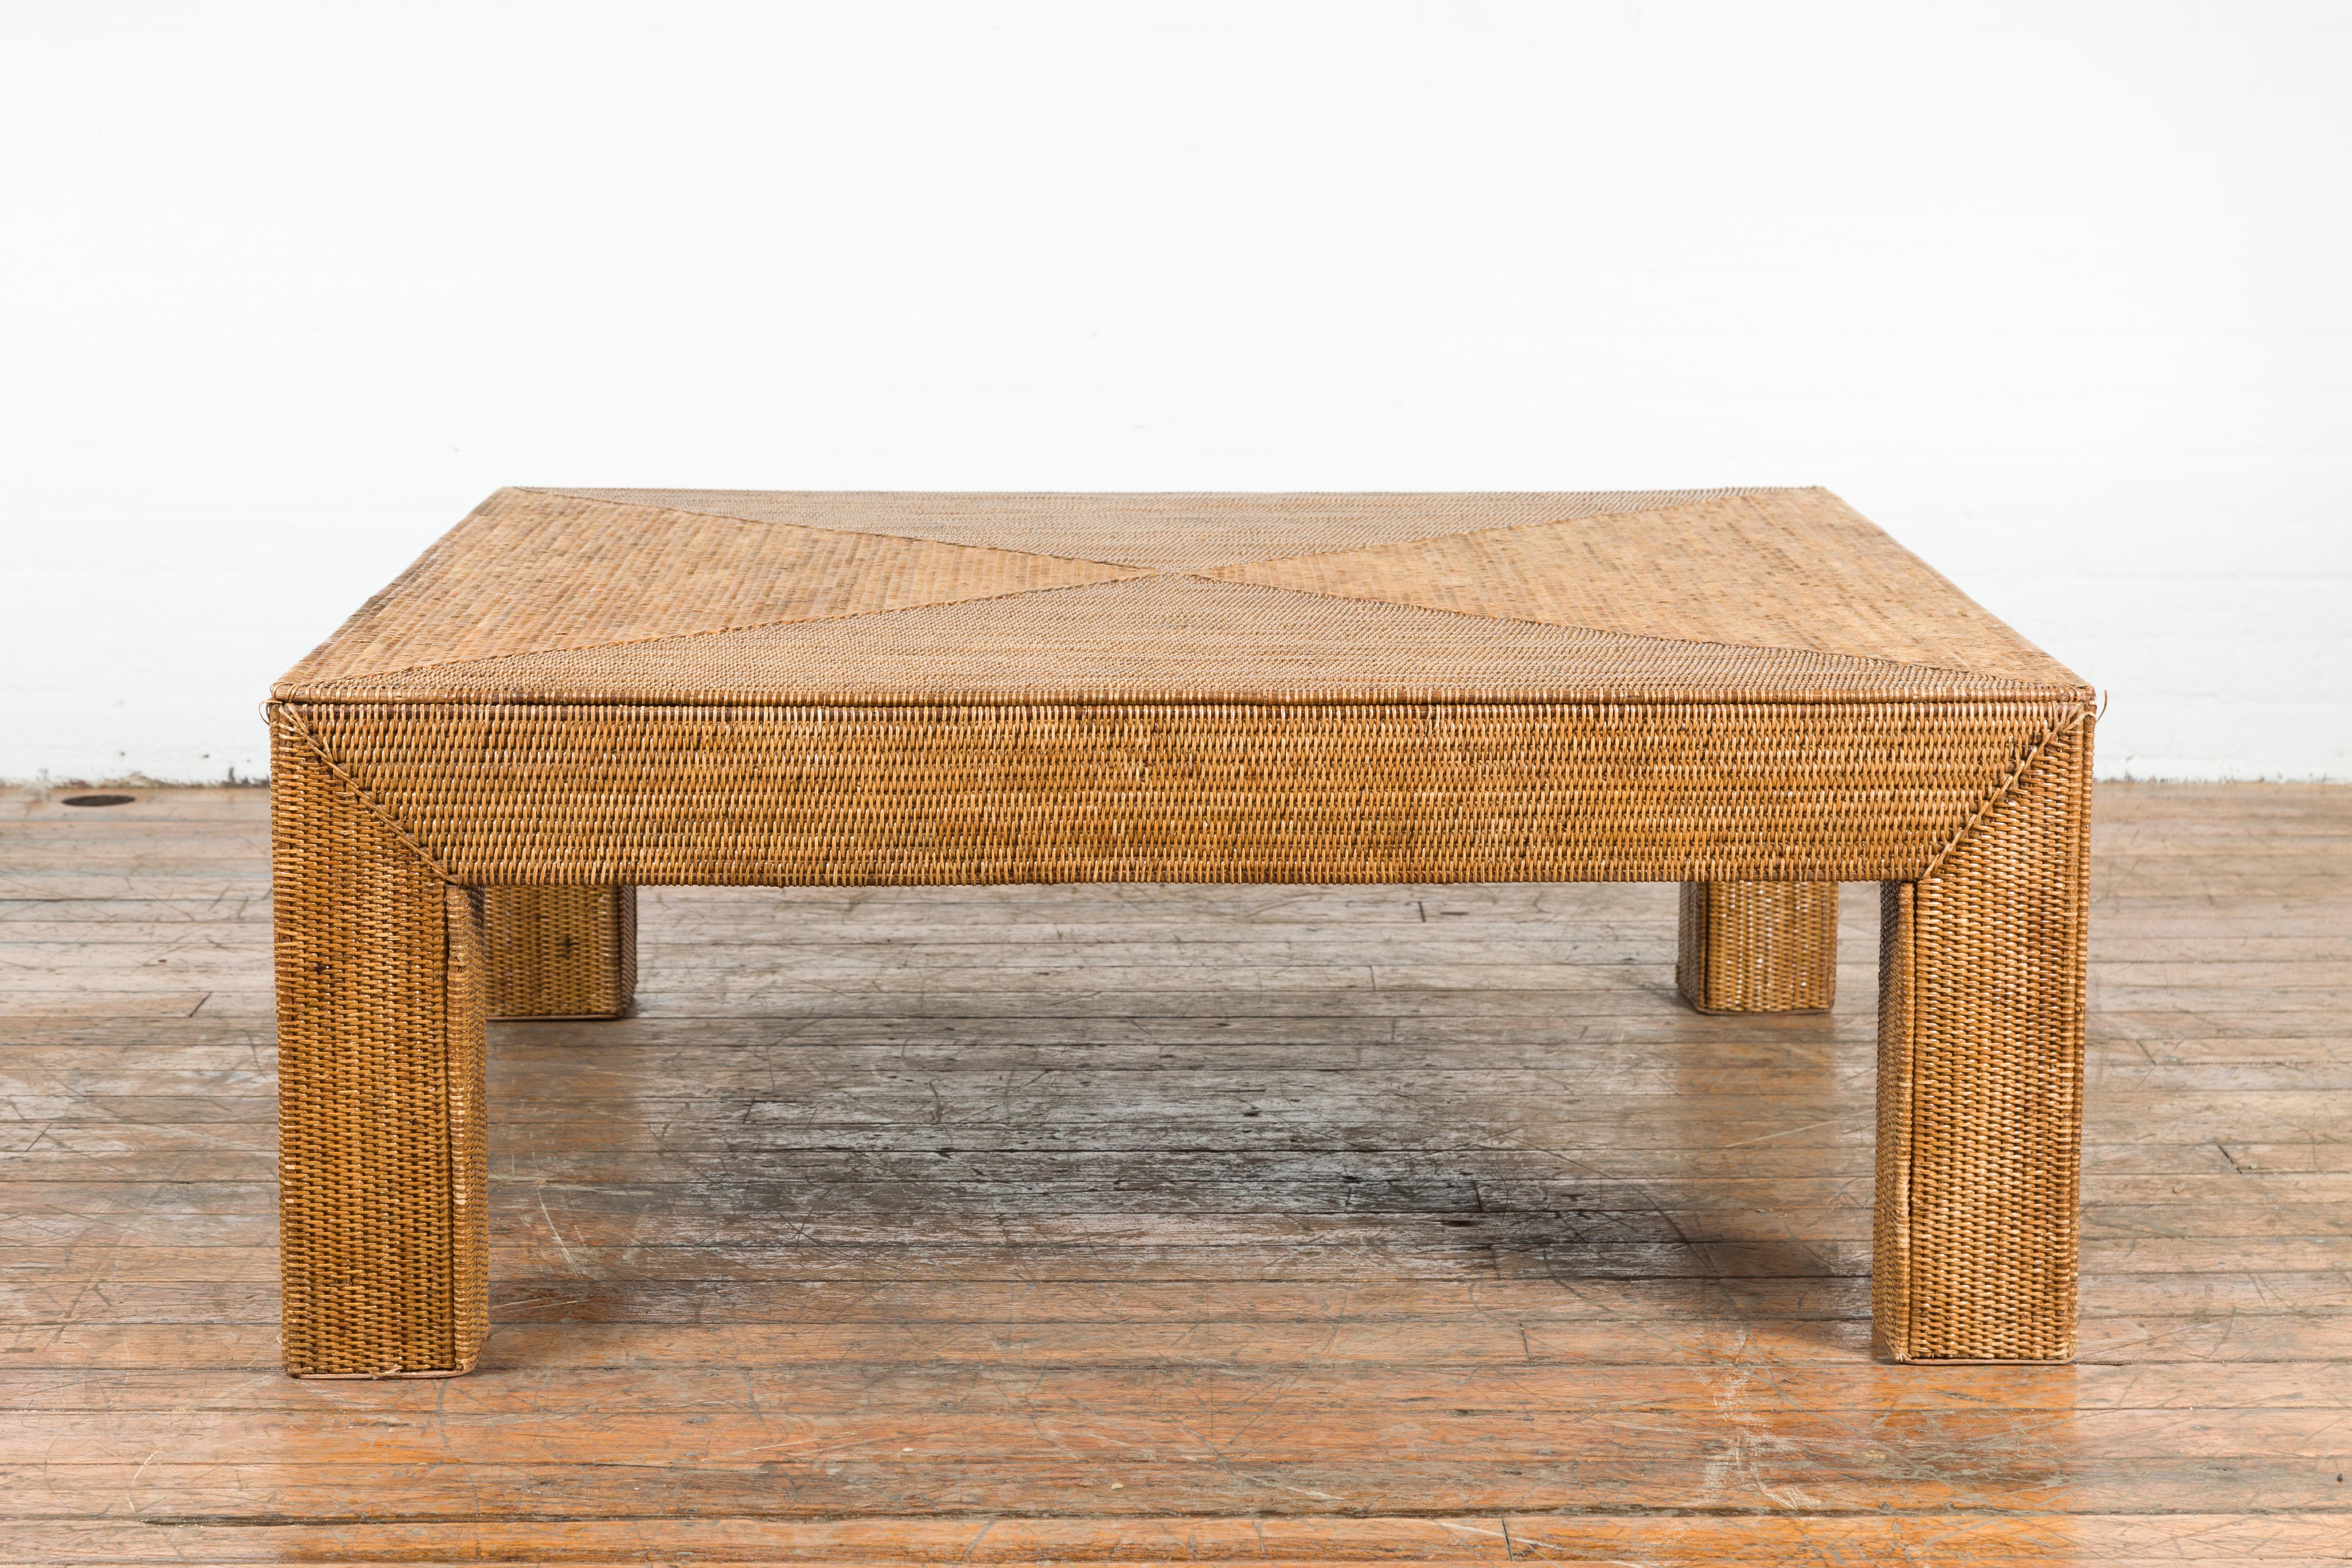 A Burmese vintage rattan parsons leg coffee table from the mid 20th century, hand-stitched over wood. We currently have several available, priced and sold $3,250 each. Created in Burma during the midcentury period, this Parsons leg coffee table